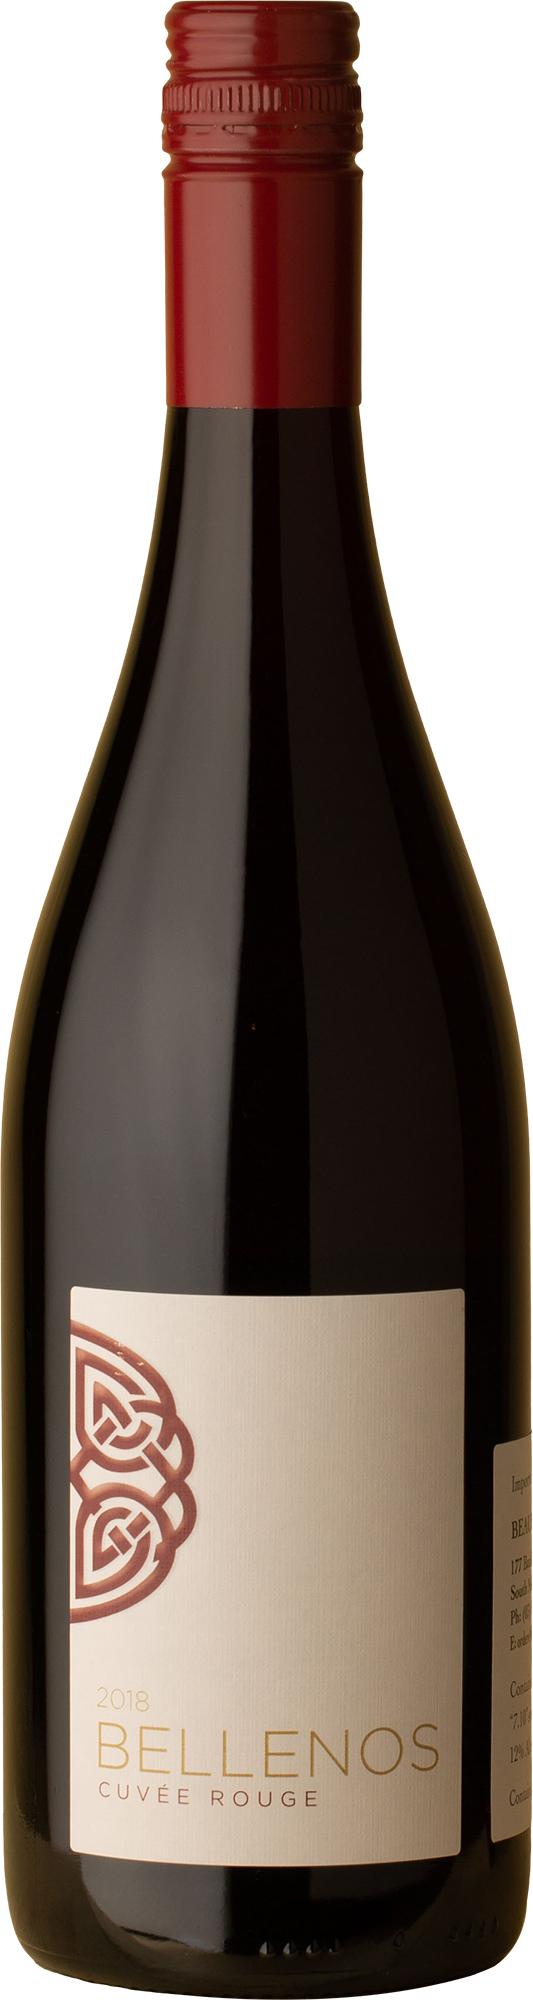 Bellenos - Cuvée Rouge Gamay / Pinot Noir 2018 Red Wine